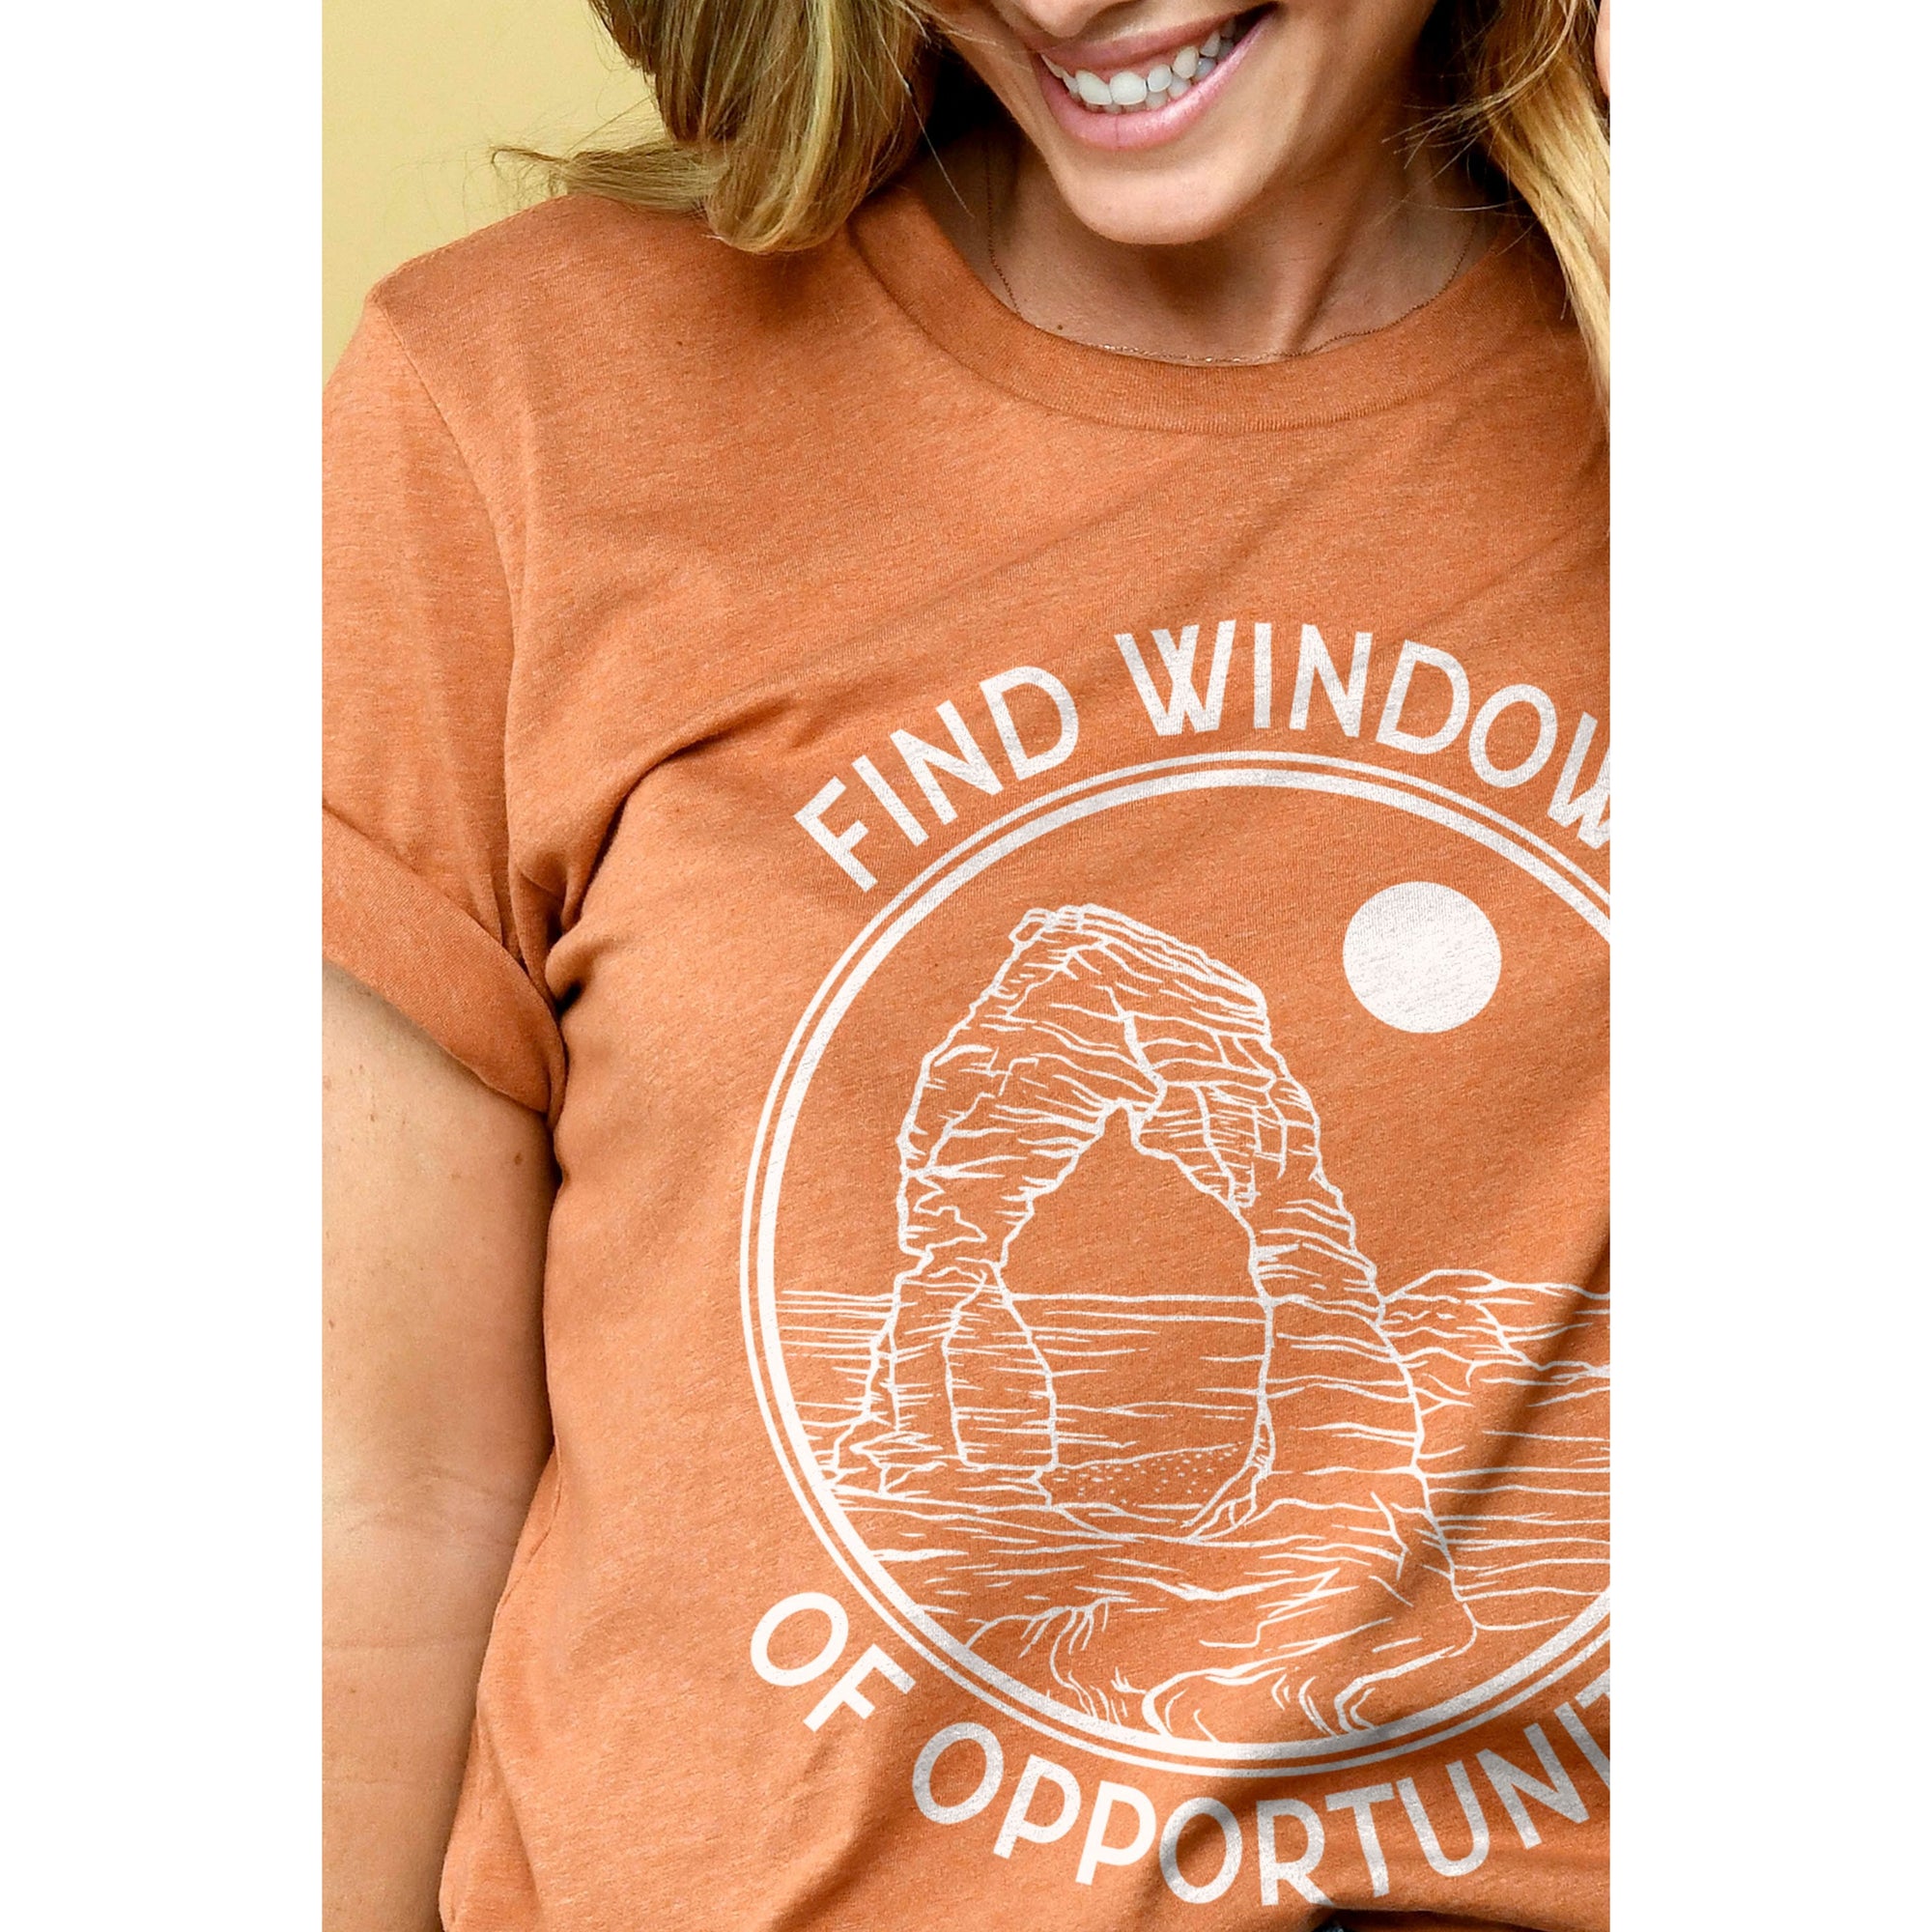 Find Windows Of Opportunity - thread tank | Stories you can wear.